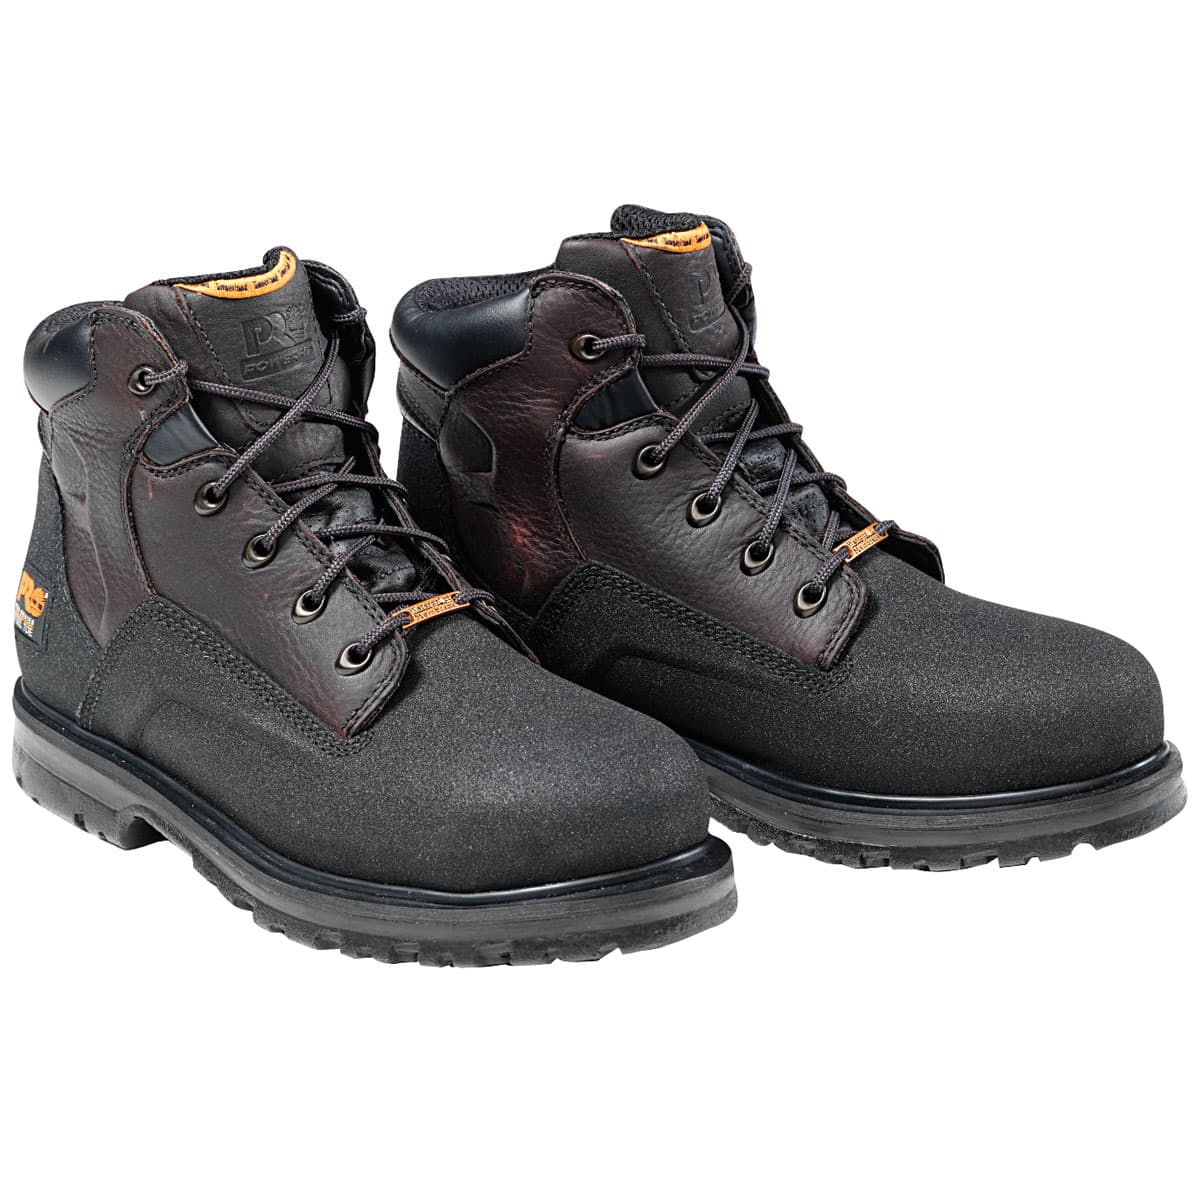 What Is The Purpose Of Steel Toe Boots? - PostureInfoHub